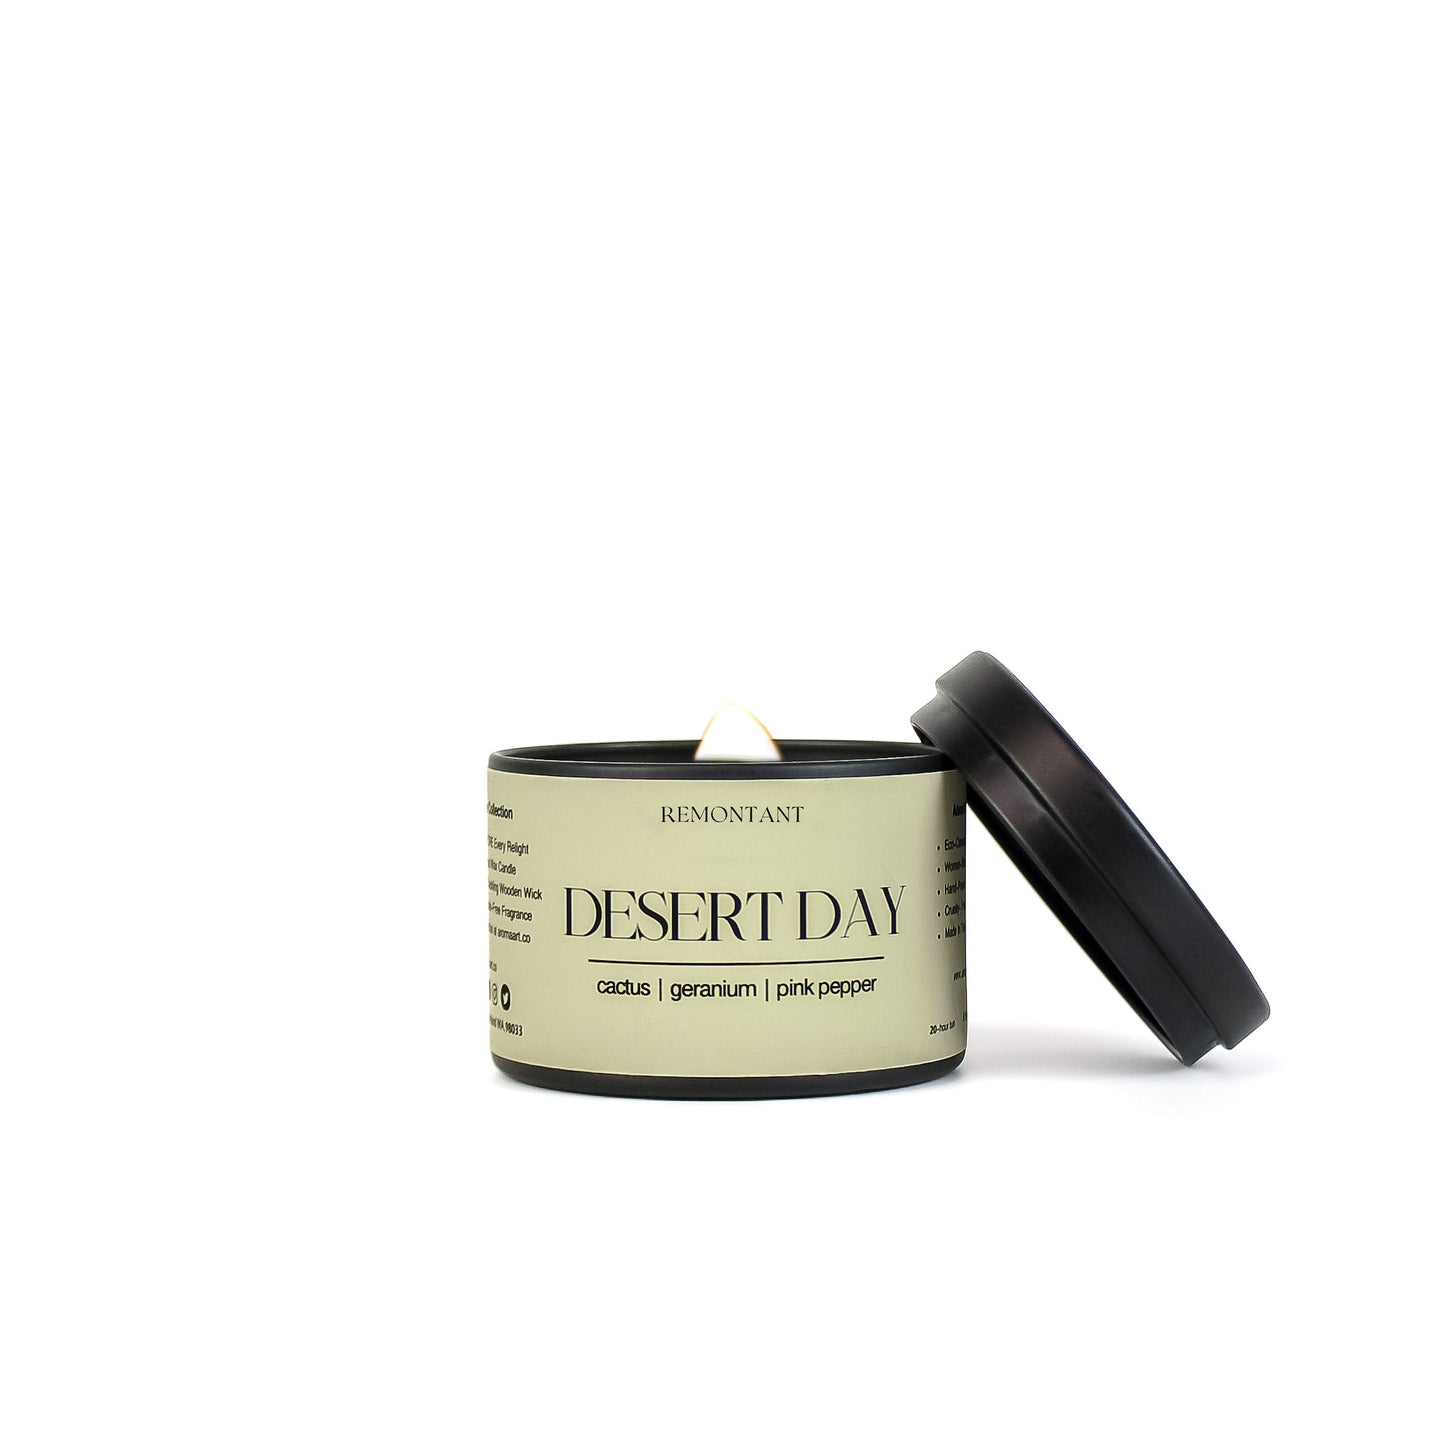 Desert Day Travel Sized Candle Tin